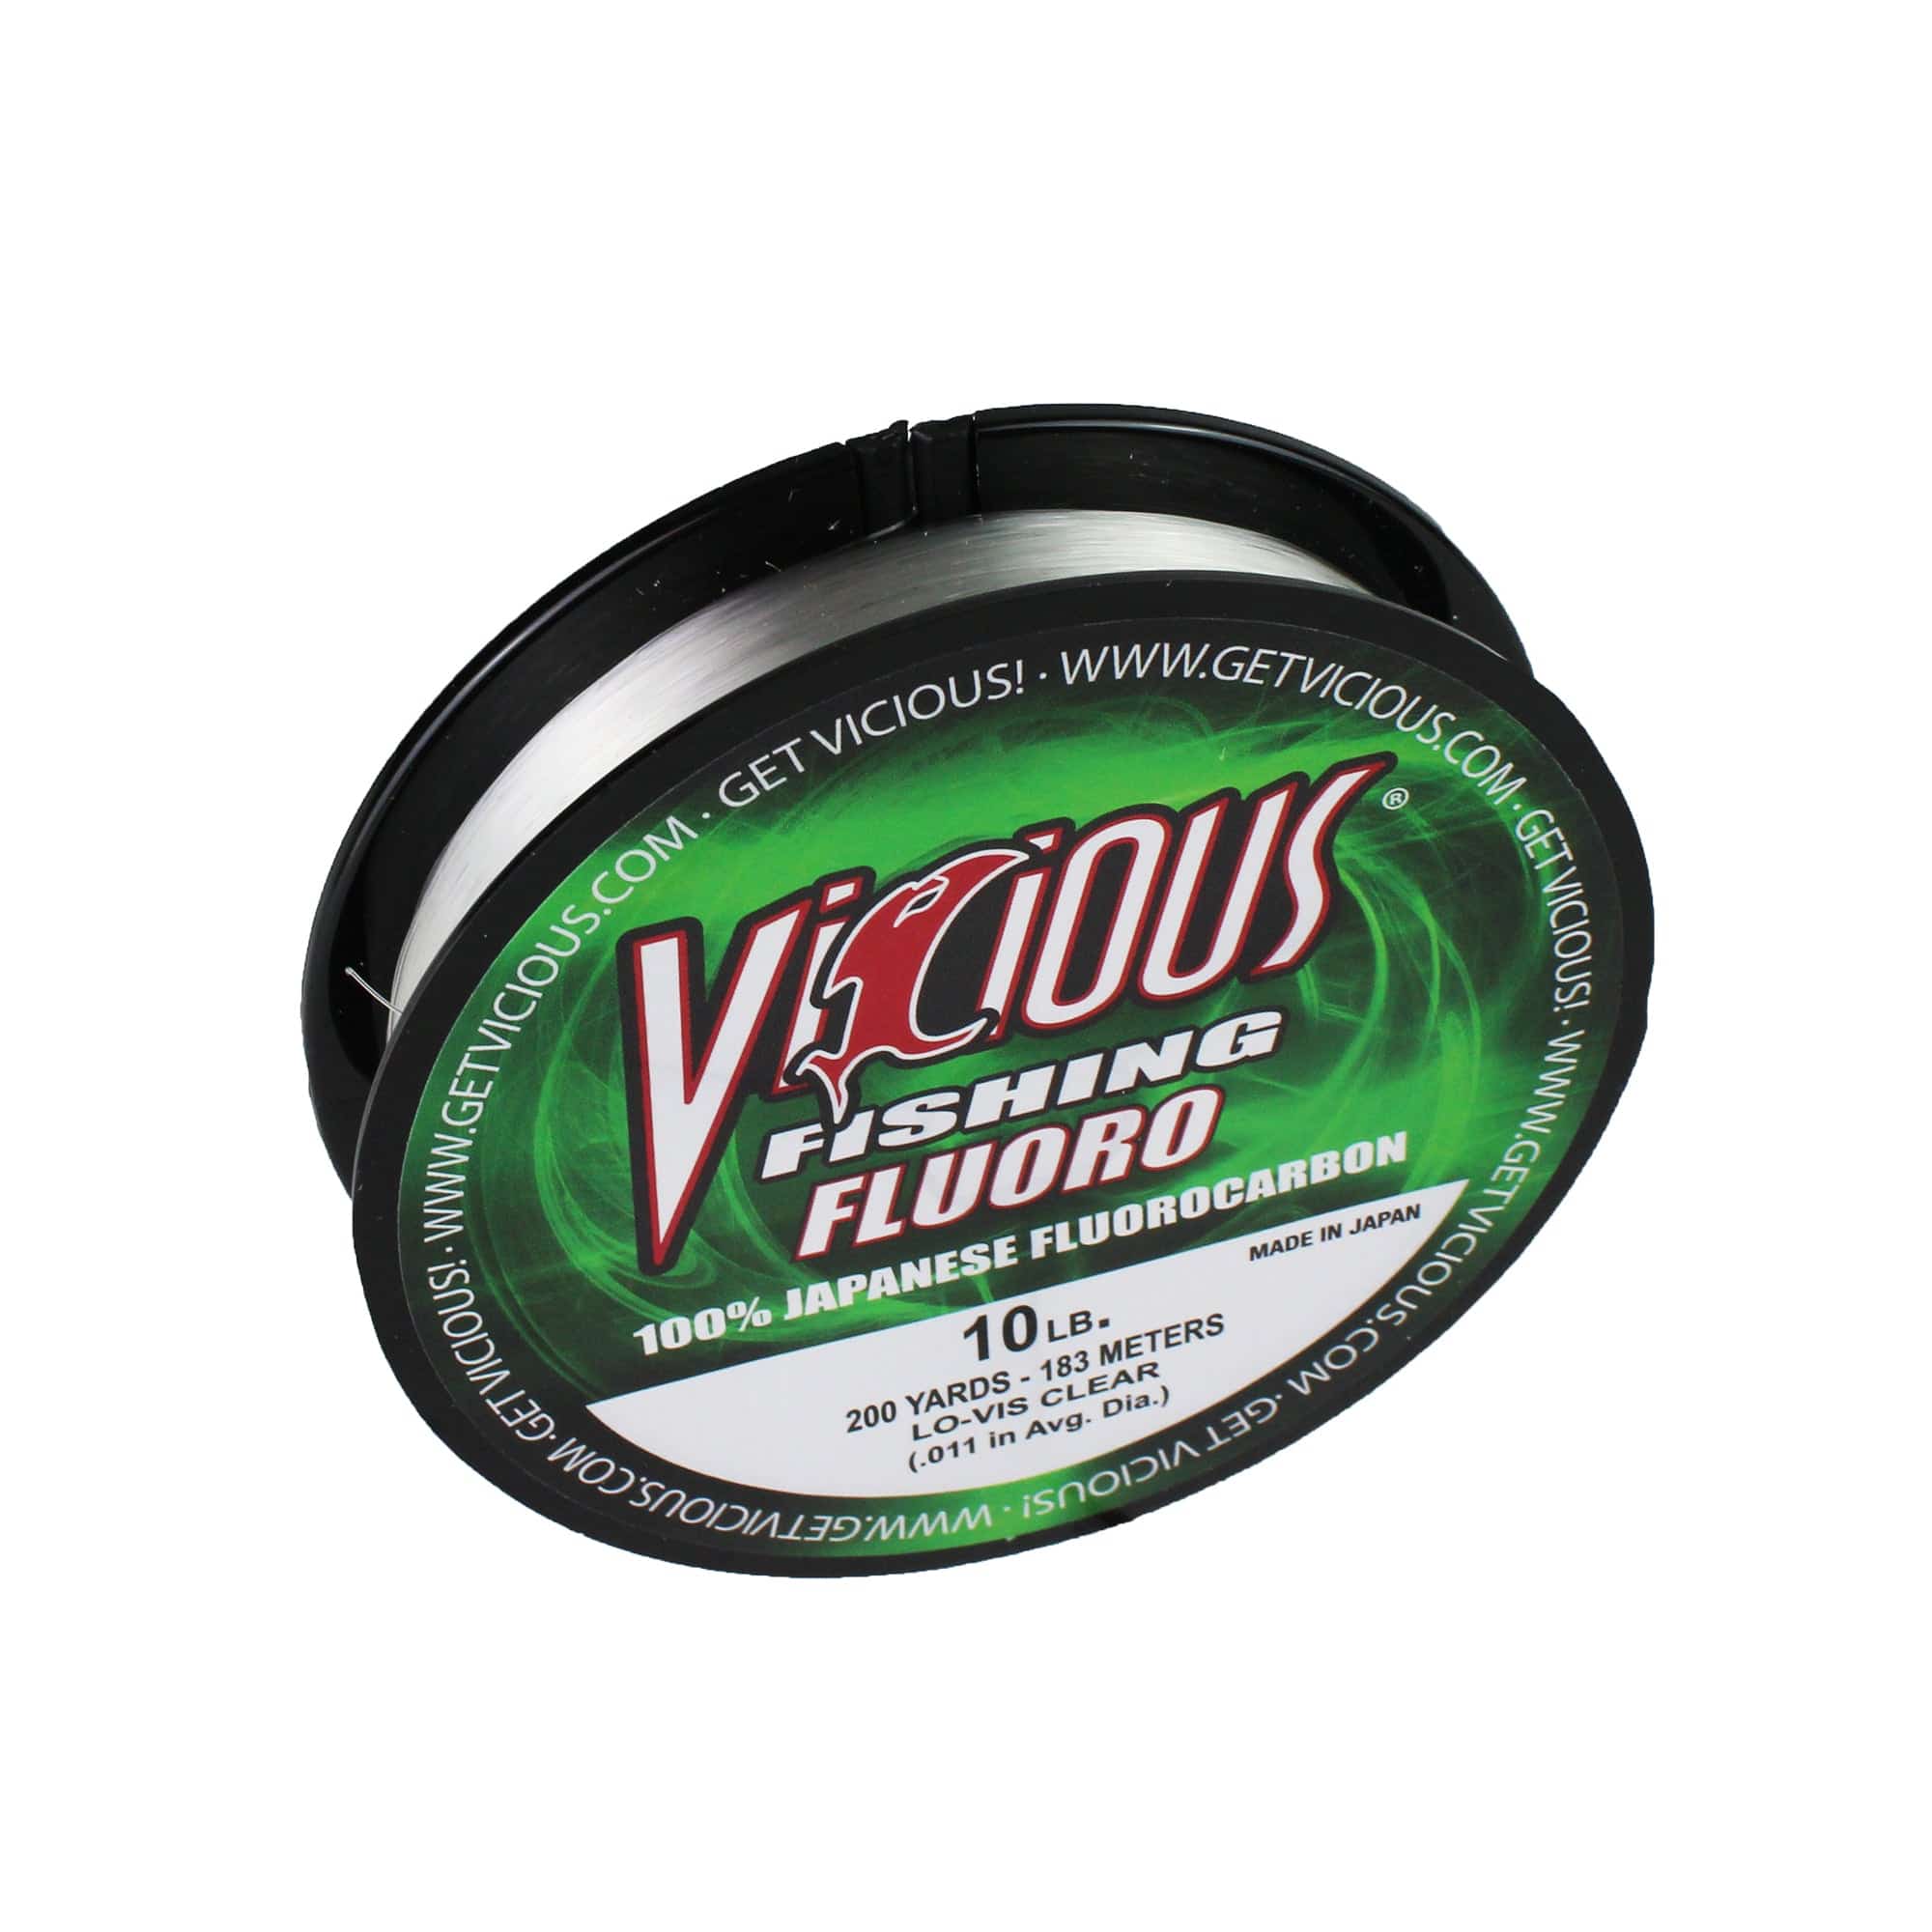 Vicious Fishing FLO Fluoro 100% Fluorocarbon Fishing Line, Clear - 200